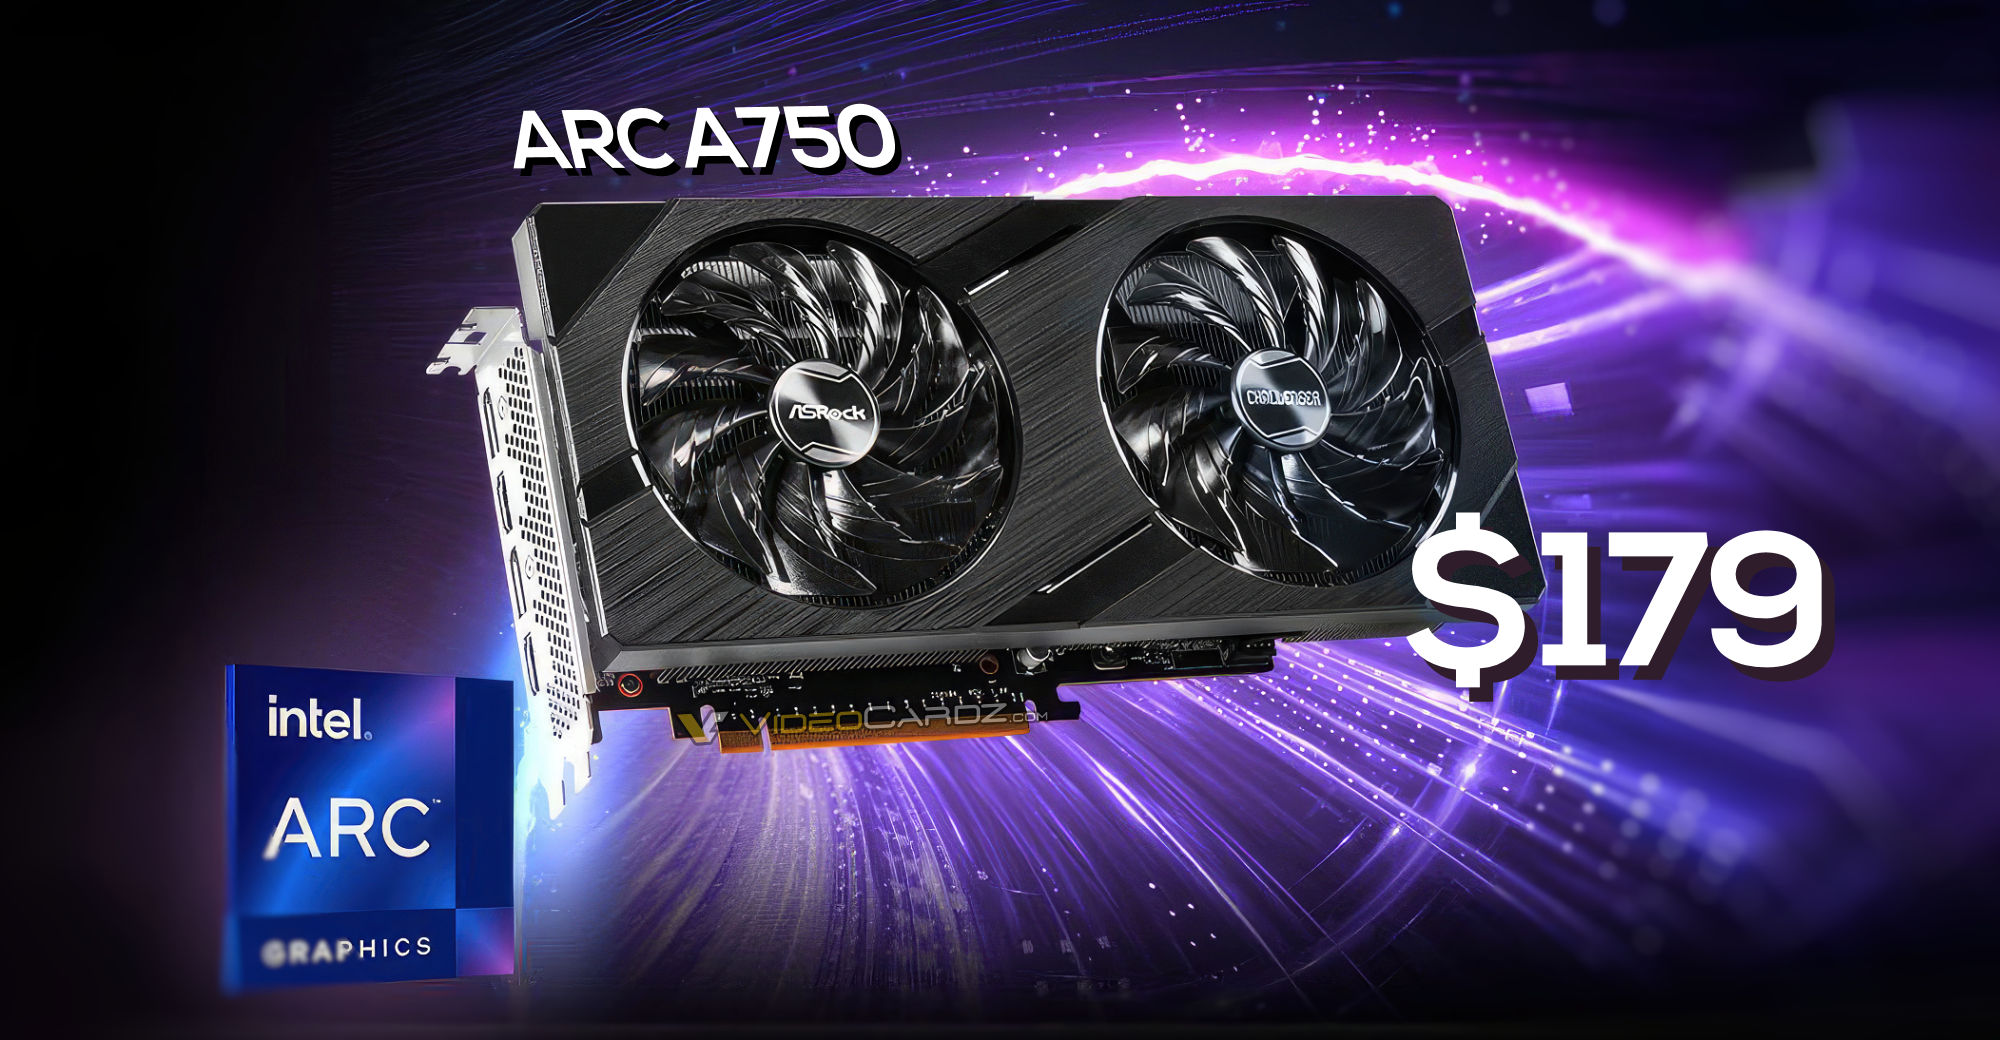 ASRock Arc A750 Challenger 8GB is now available for just $179 